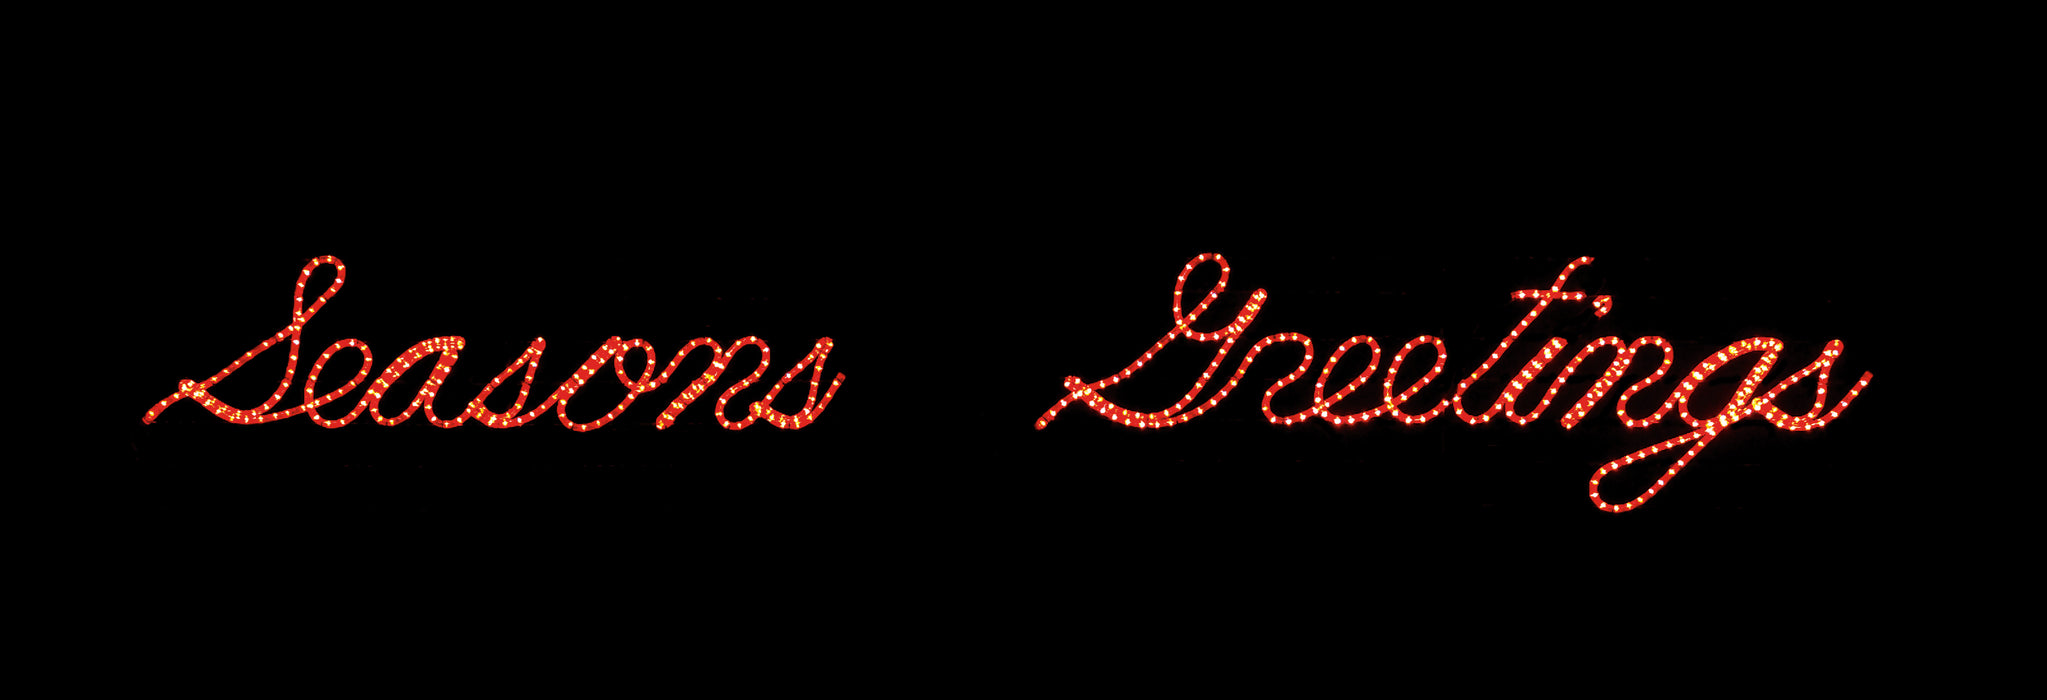 Seasons Greetings LED Script sign, holiday, Christmas outdoor motif, greeting sign, outdoor, indoor, LED, bulb, lights, quality, durable, commercial-grade, light motif, religious, Christmas, holiday, aluminum, decoration, seasons greetings, sign, giant, life-sized